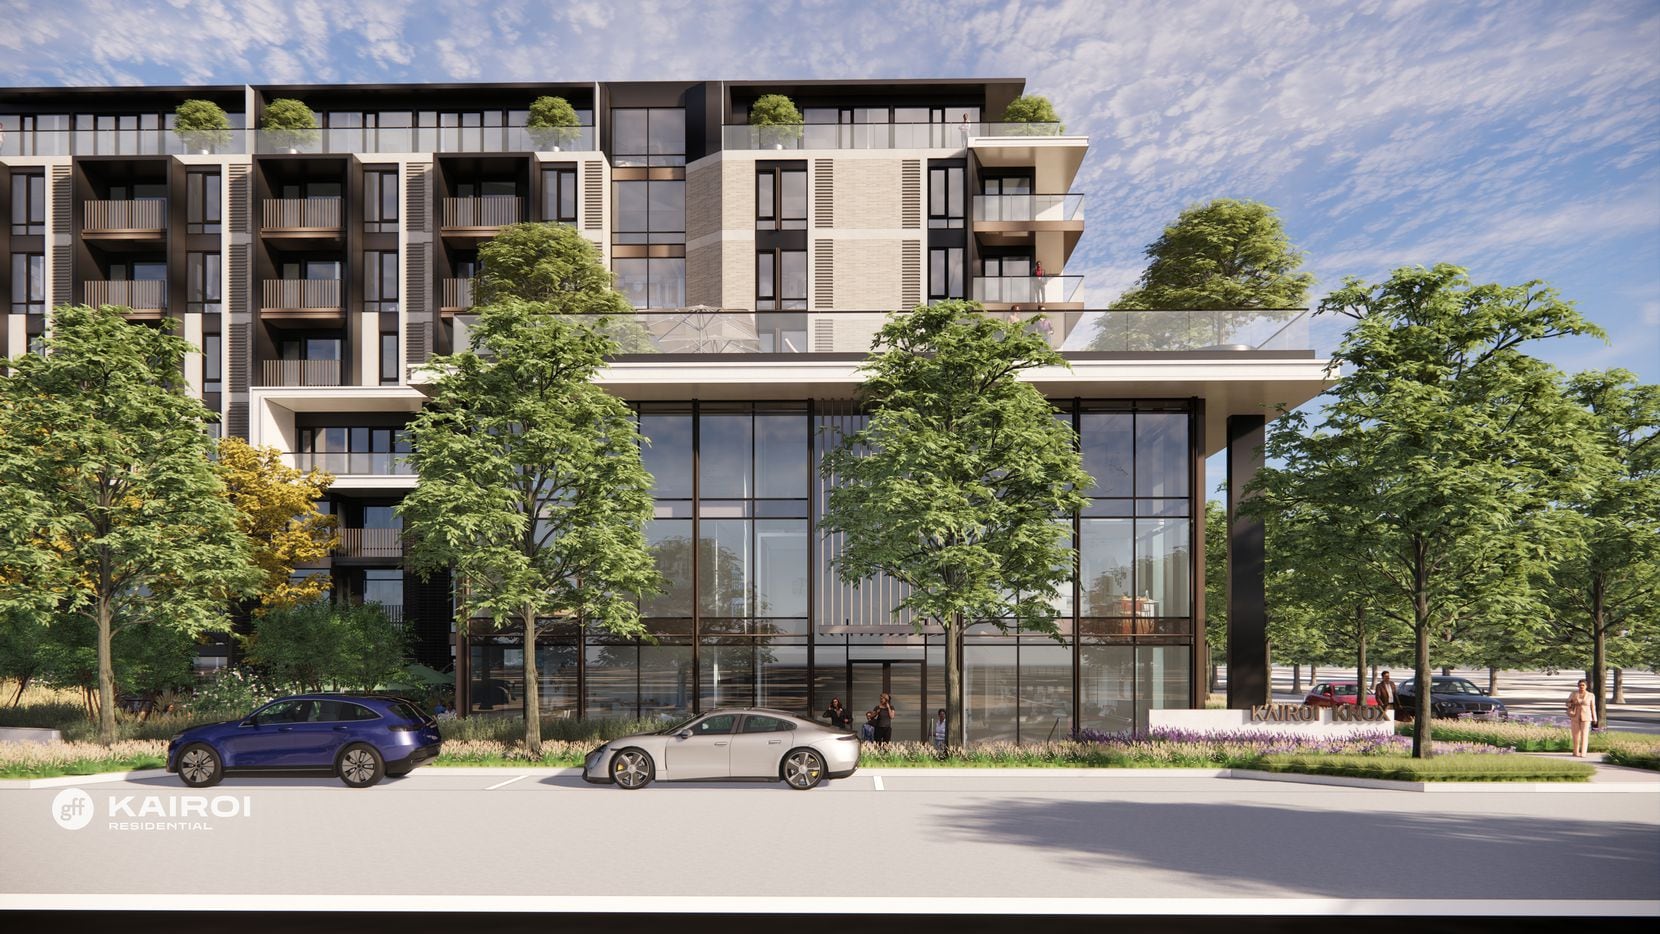 Kairoi Residential’s next Dallas development play is on Travis Street just south of Knox...